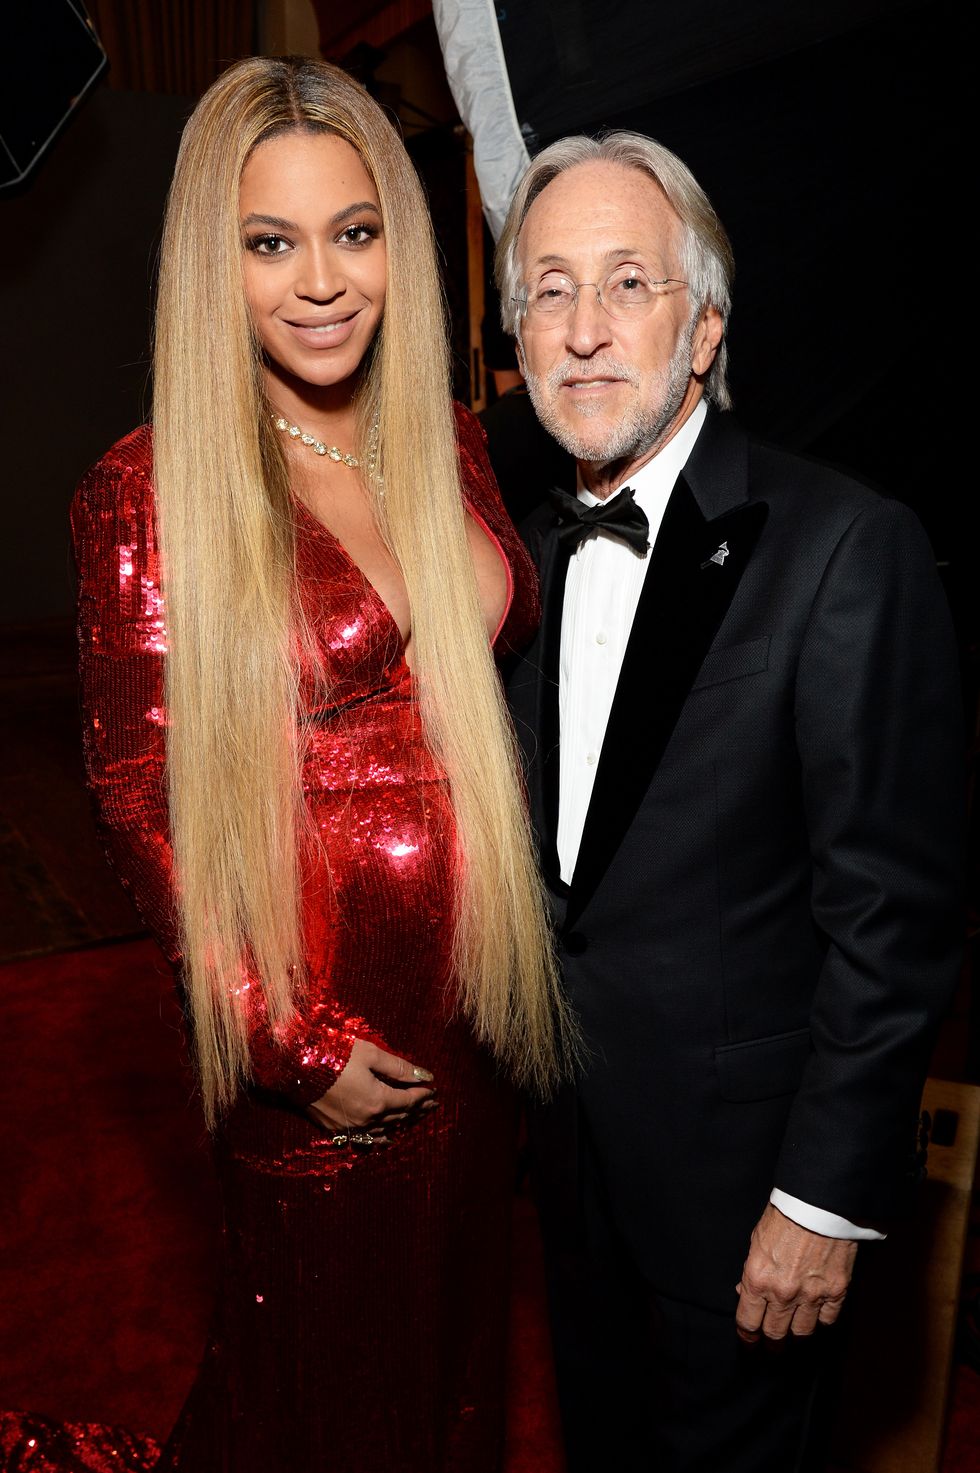 LOS ANGELES, CA - FEBRUARY 12: Recording artist Beyonce (L) and President/CEO of The Recording Academy and GRAMMY Foundation President/CEO Neil Portnow attend the The 59th GRAMMY Awards at STAPLES Center on February 12, 2017 in Los Angeles, California. (Photo by Michael Kovac/Getty Images for NARAS)